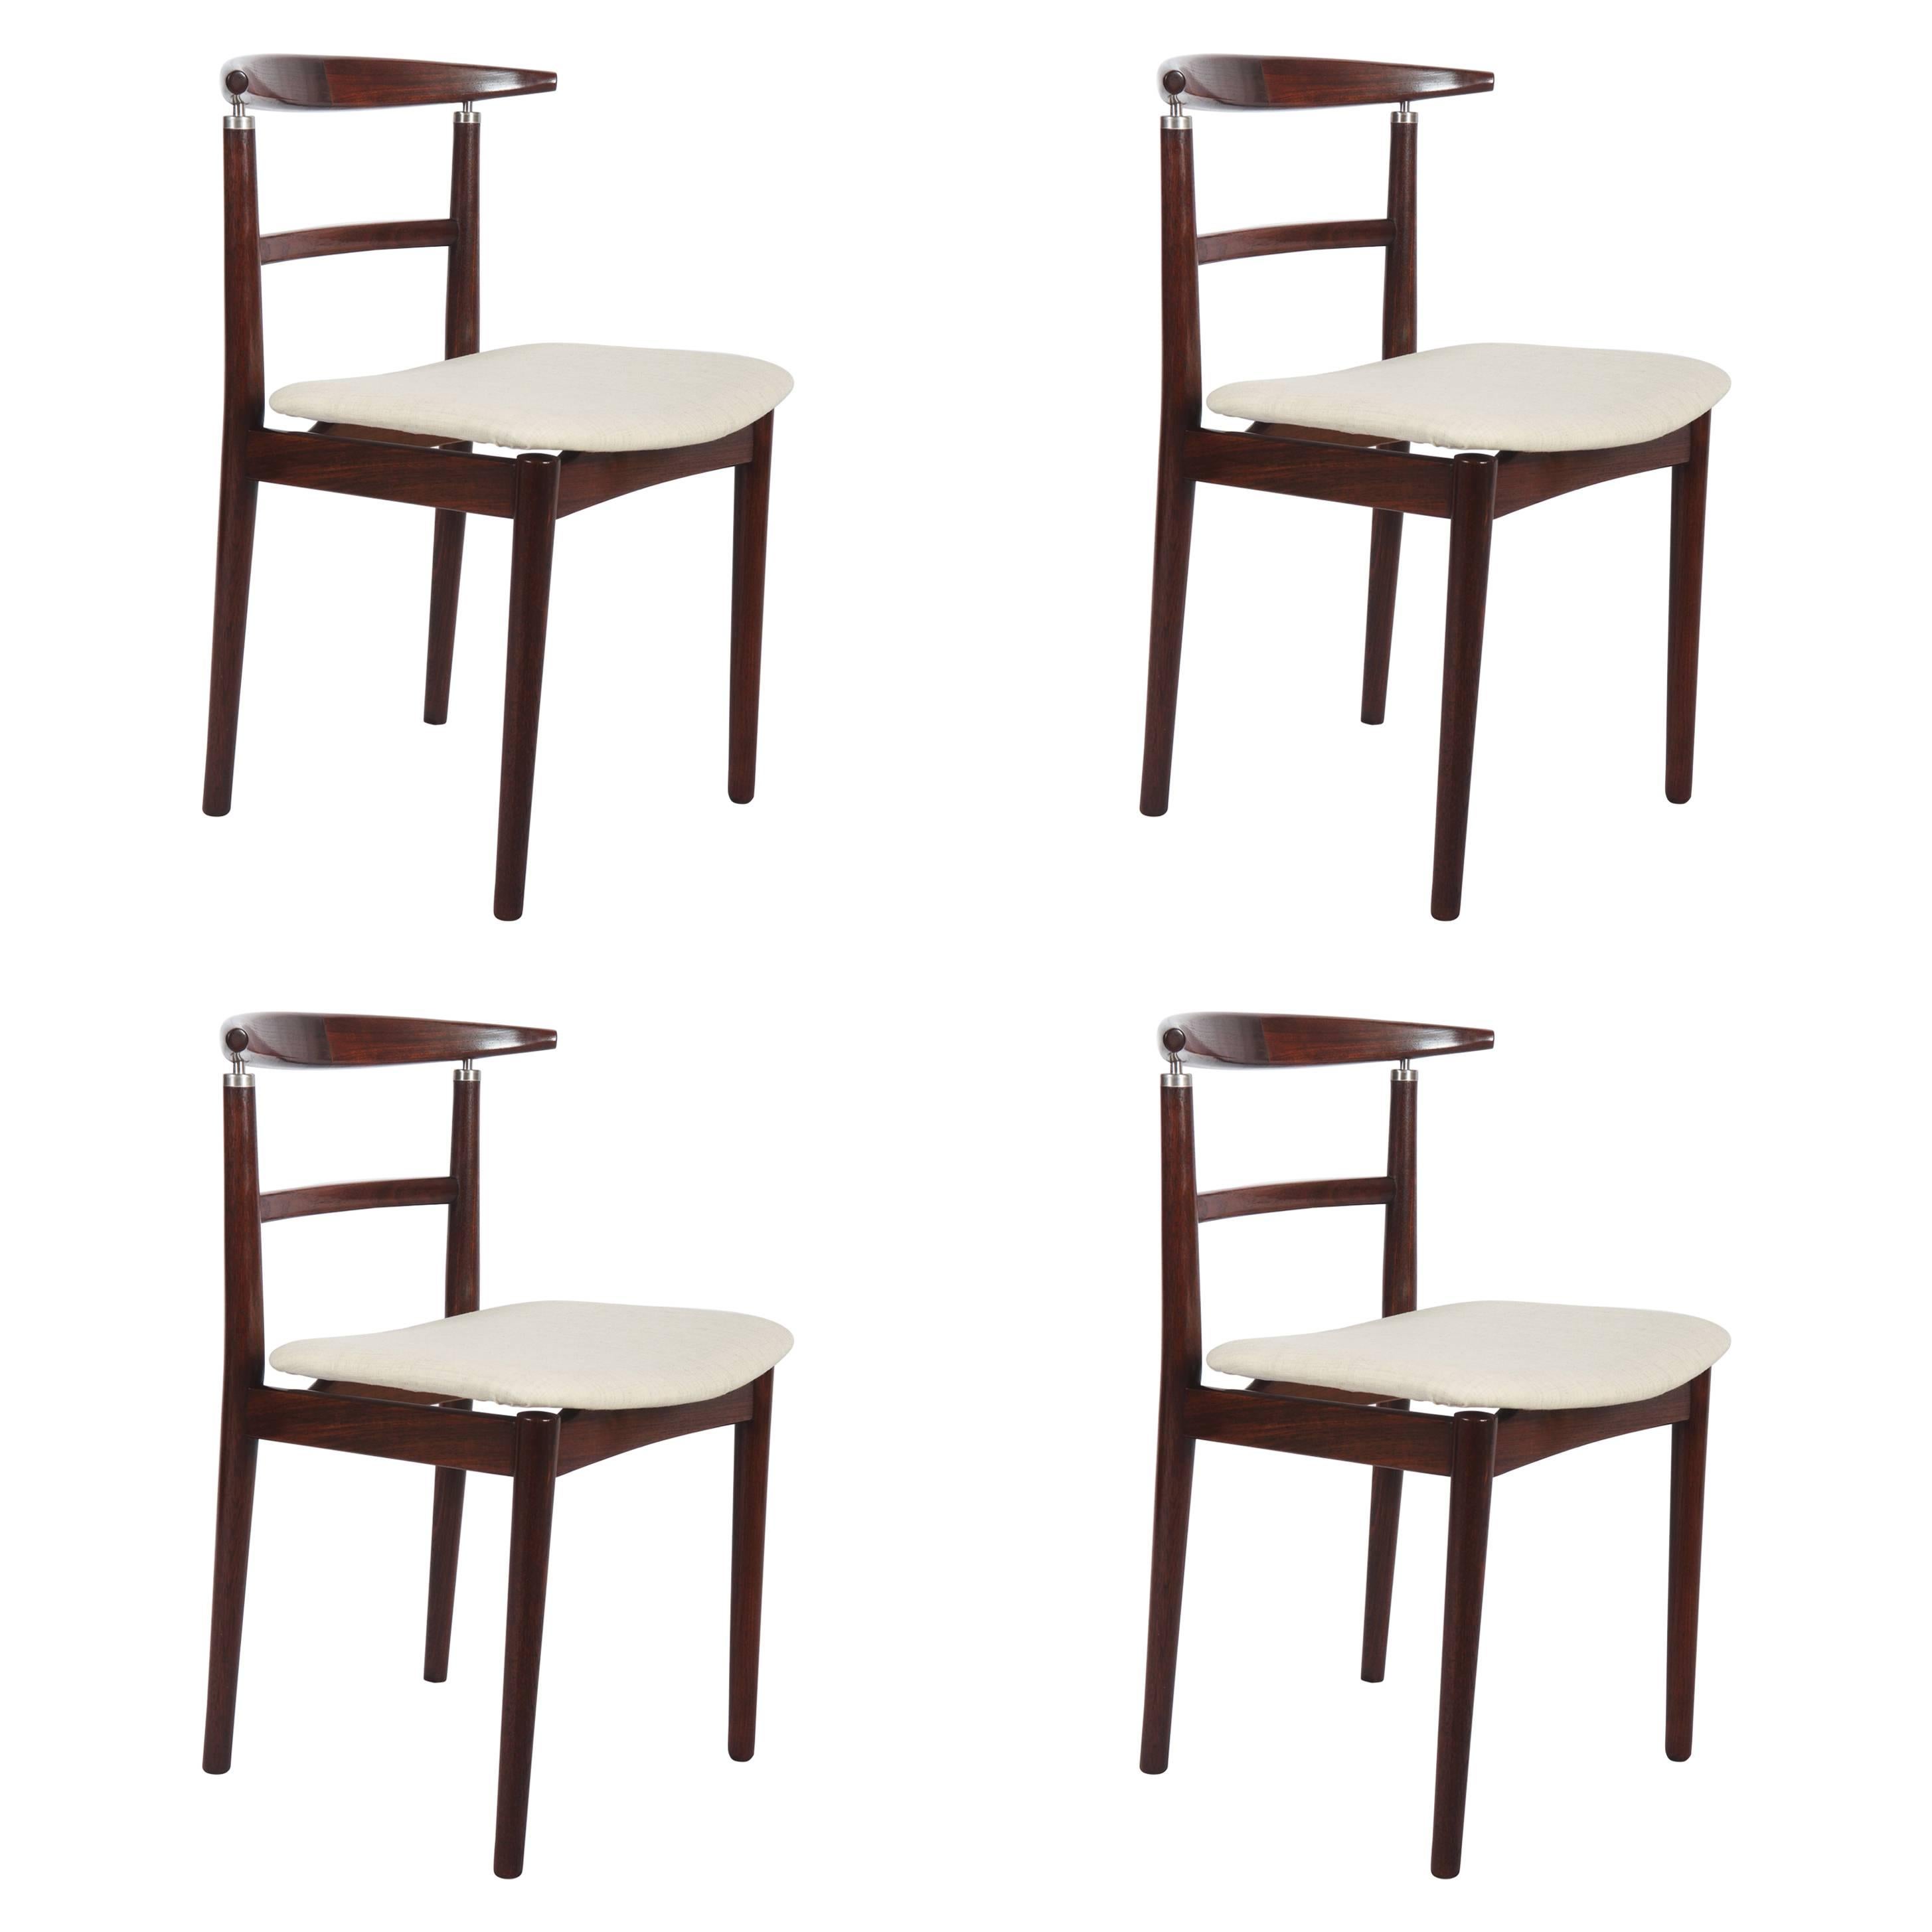 Set of Four Danish Dining Chairs by Helge Sibast and Børge Rammeskov